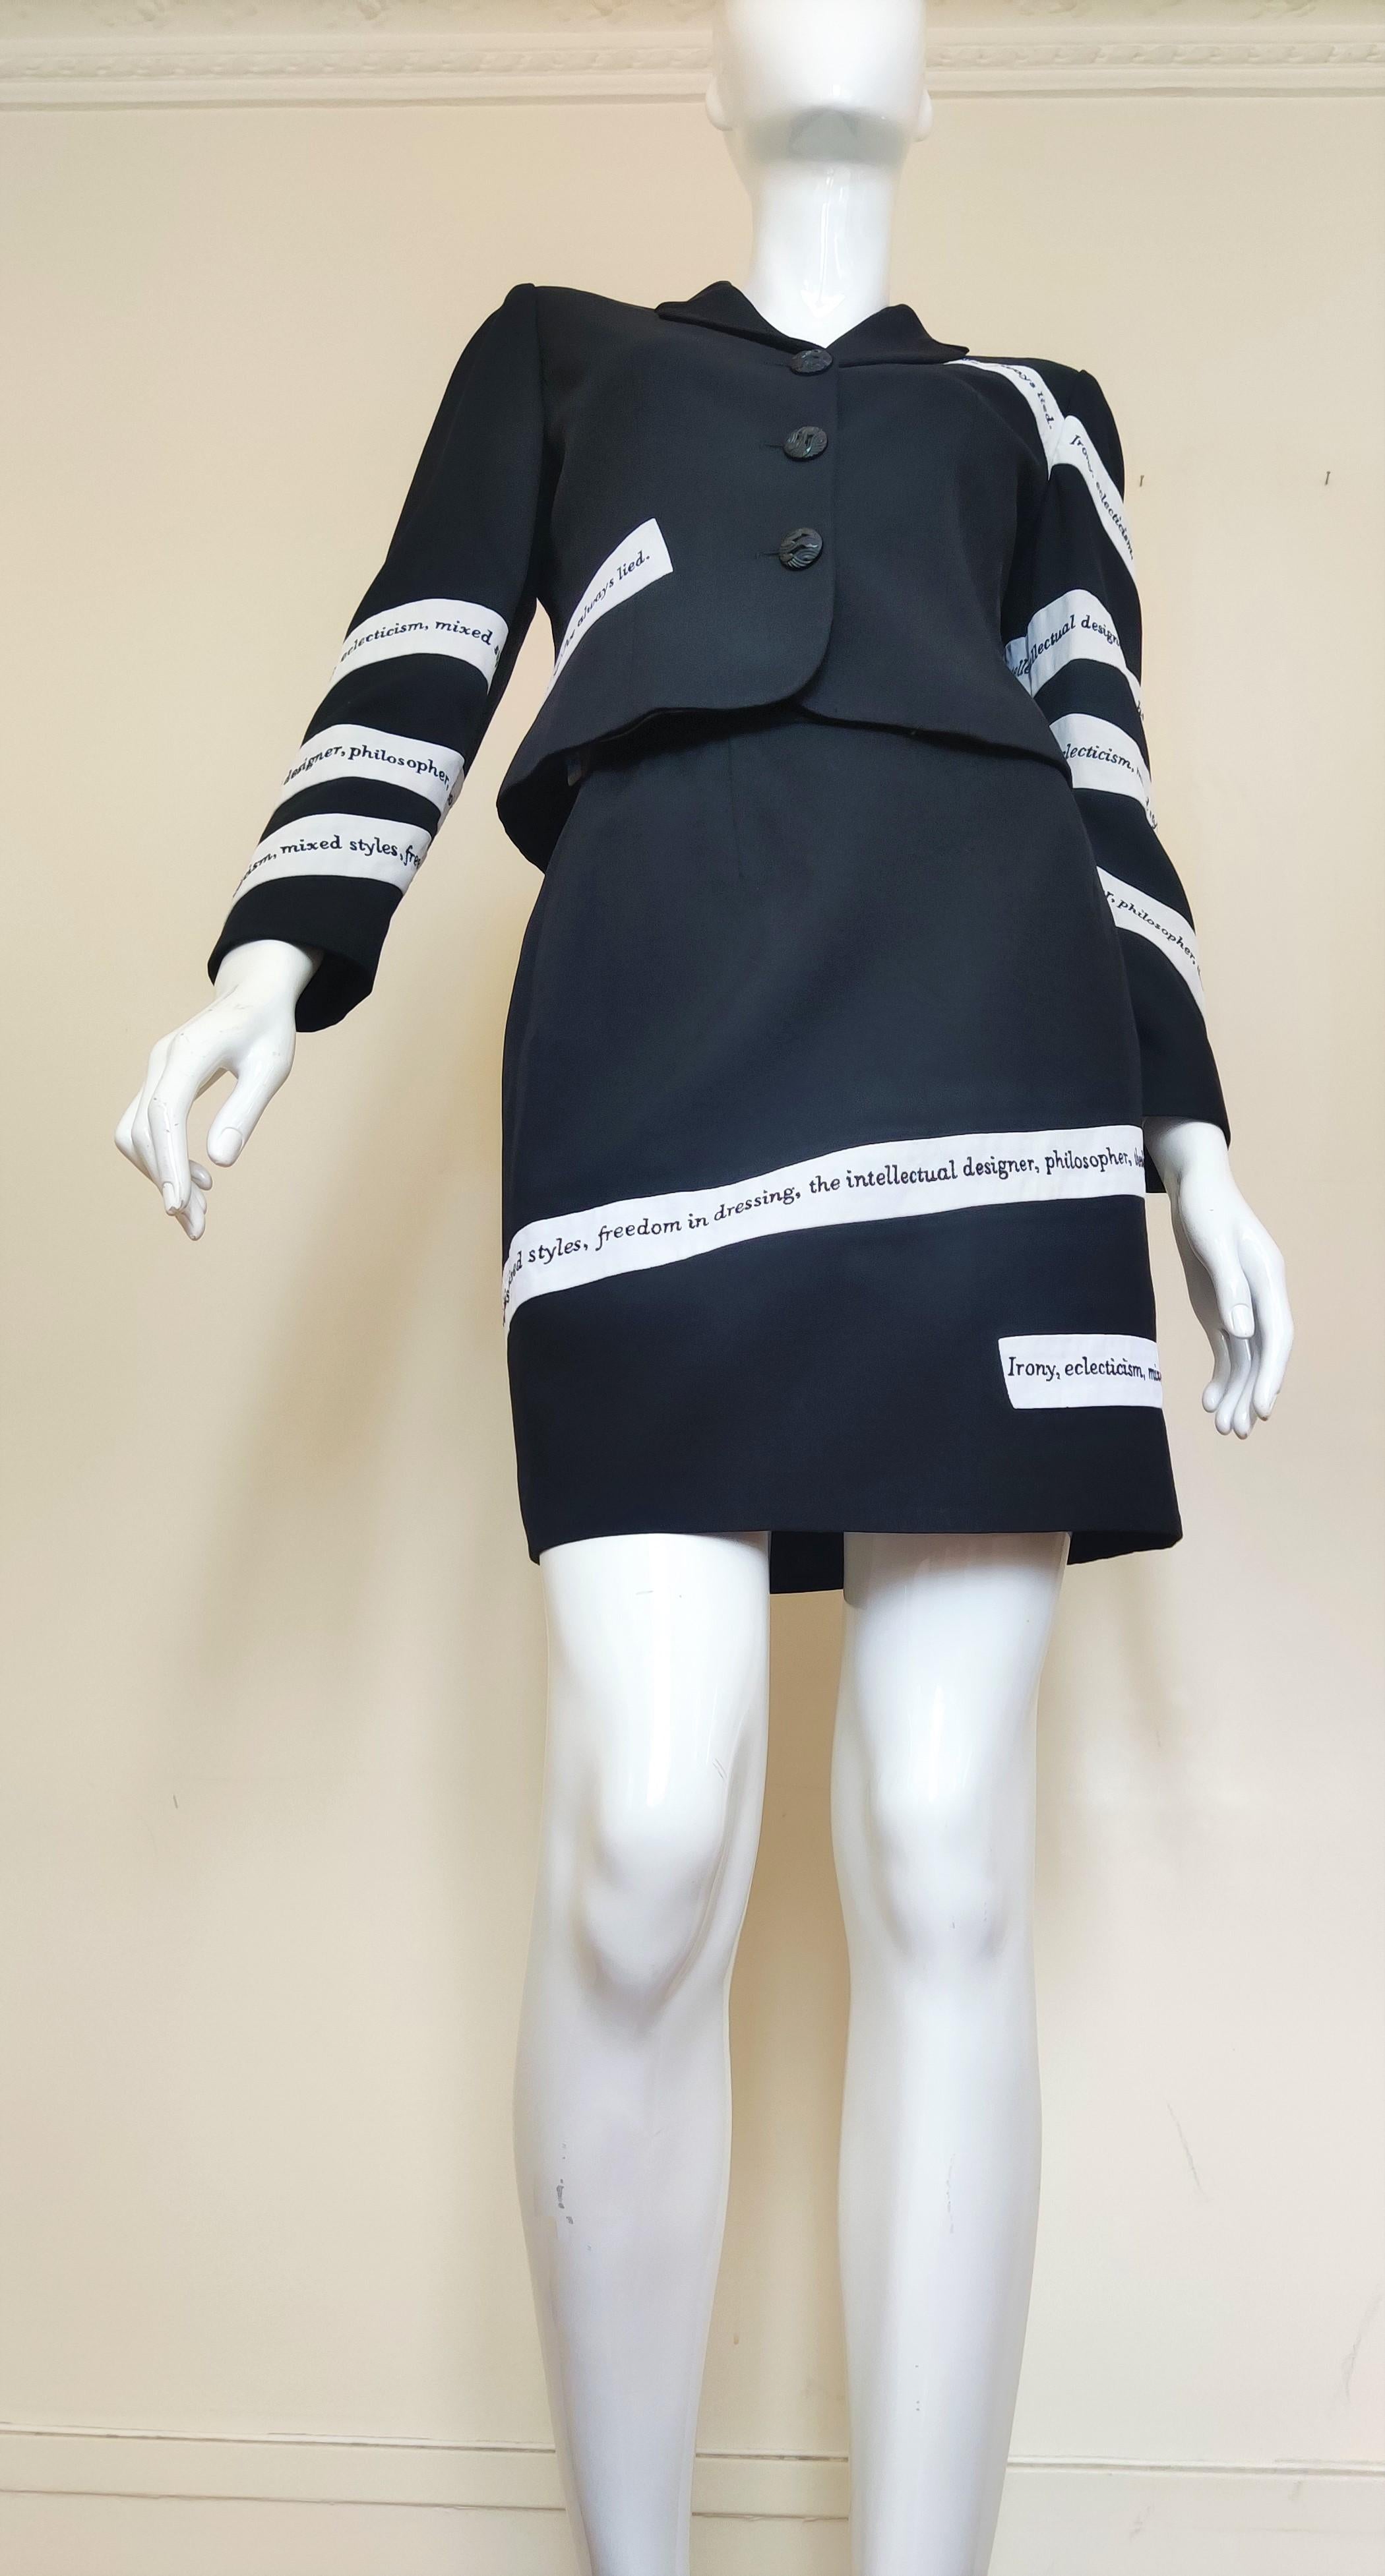 Moschino Cheap and Chic Irony Text Tape Vintage Couture Black White Dress Suit For Sale 6